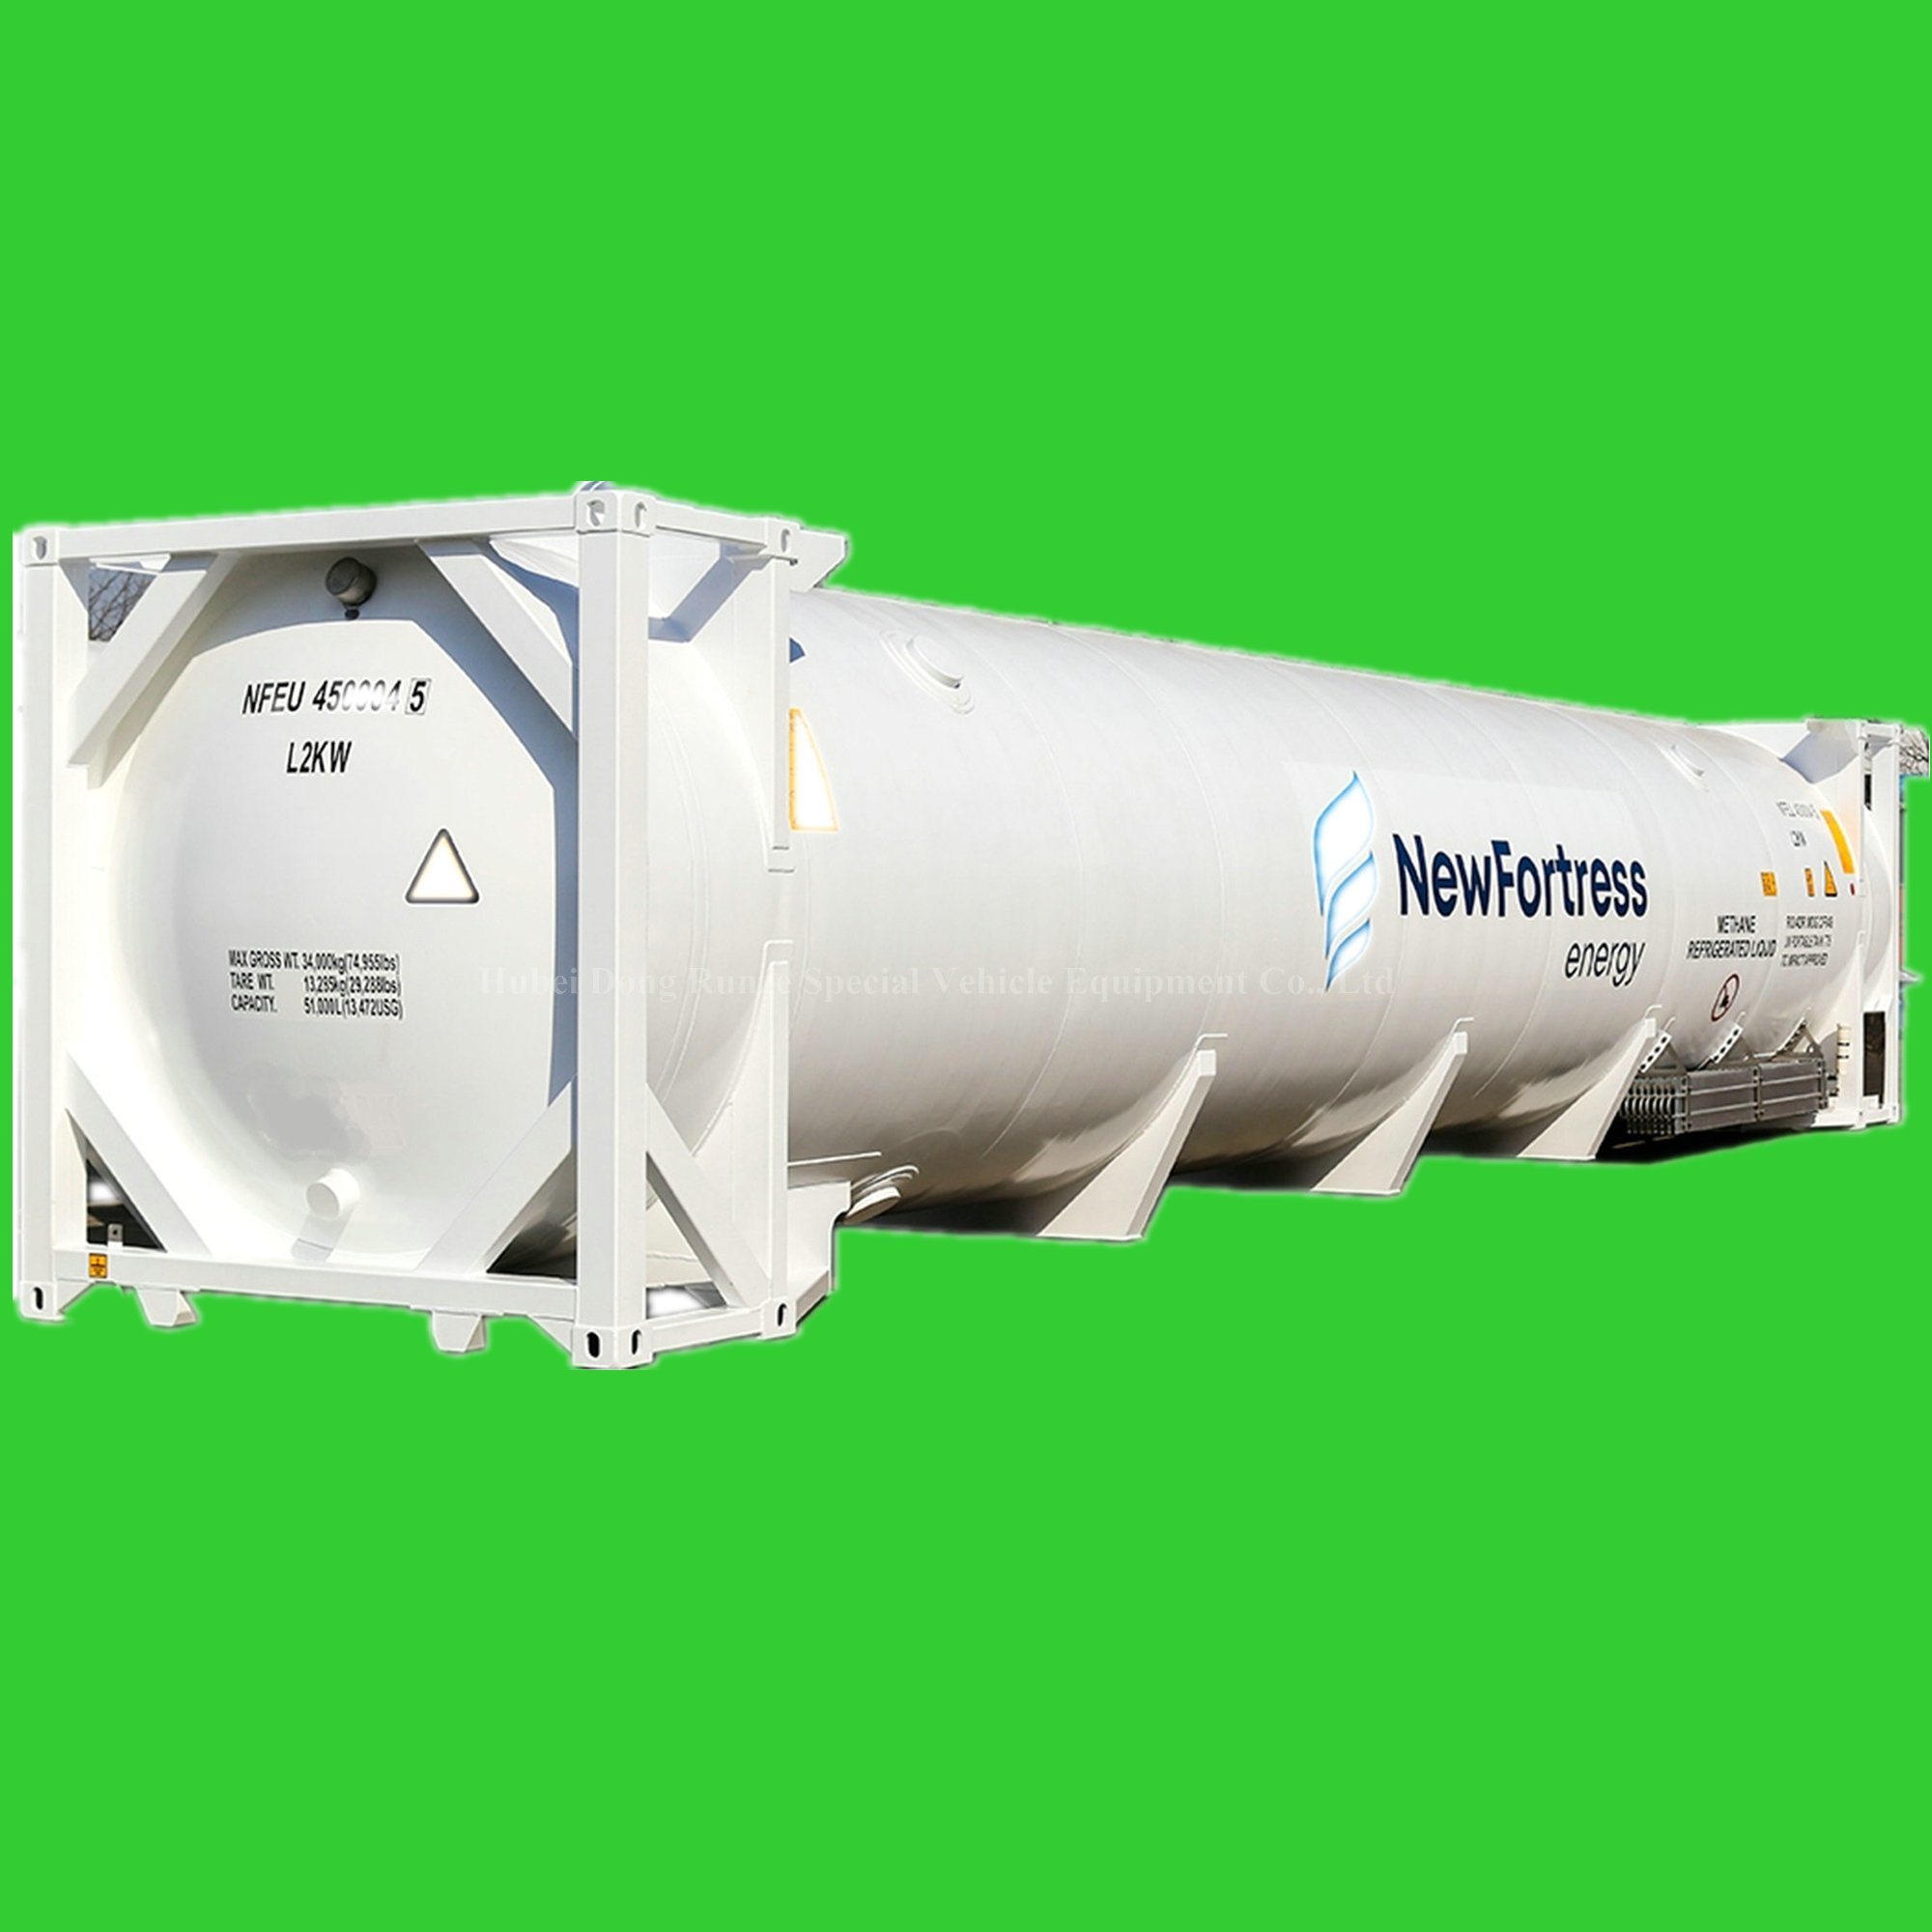 40FT T75 Cryogenic Tank for Transporting Oxygen, Nitrogen, Argon, CO2, LNG by Marine Railway Road